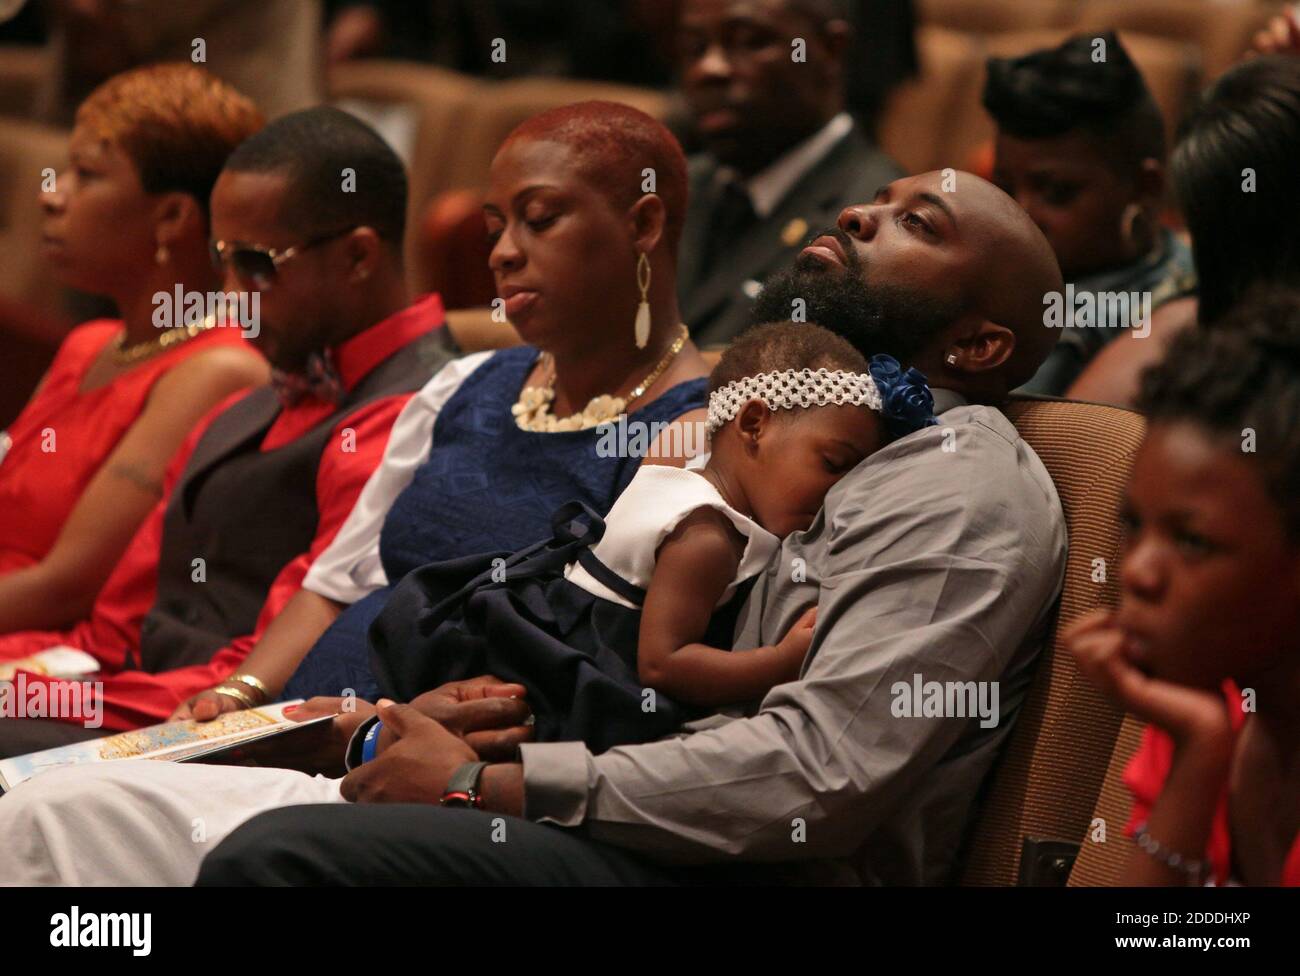 NO FILM, NO VIDEO, NO TV, NO DOCUMENTARY - Michael Brown Sr. sits with an unidentified girl on his lap during the funeral services for his son Michael Brown on Monday, August 25, 2014, at Friendly Temple Missionary Baptist Church in St. Louis, MO, USA. Also pictured are, from left: Lesley McSpadden, Michael Brown's mother; Louis Head, Michael Brown's stepfather; and Cal Brown, Michael Brown's stepmother. Photo by Robert Cohen/St. Louis Post-Dispatch/MCT/ABACAPRESS.COM Stock Photo